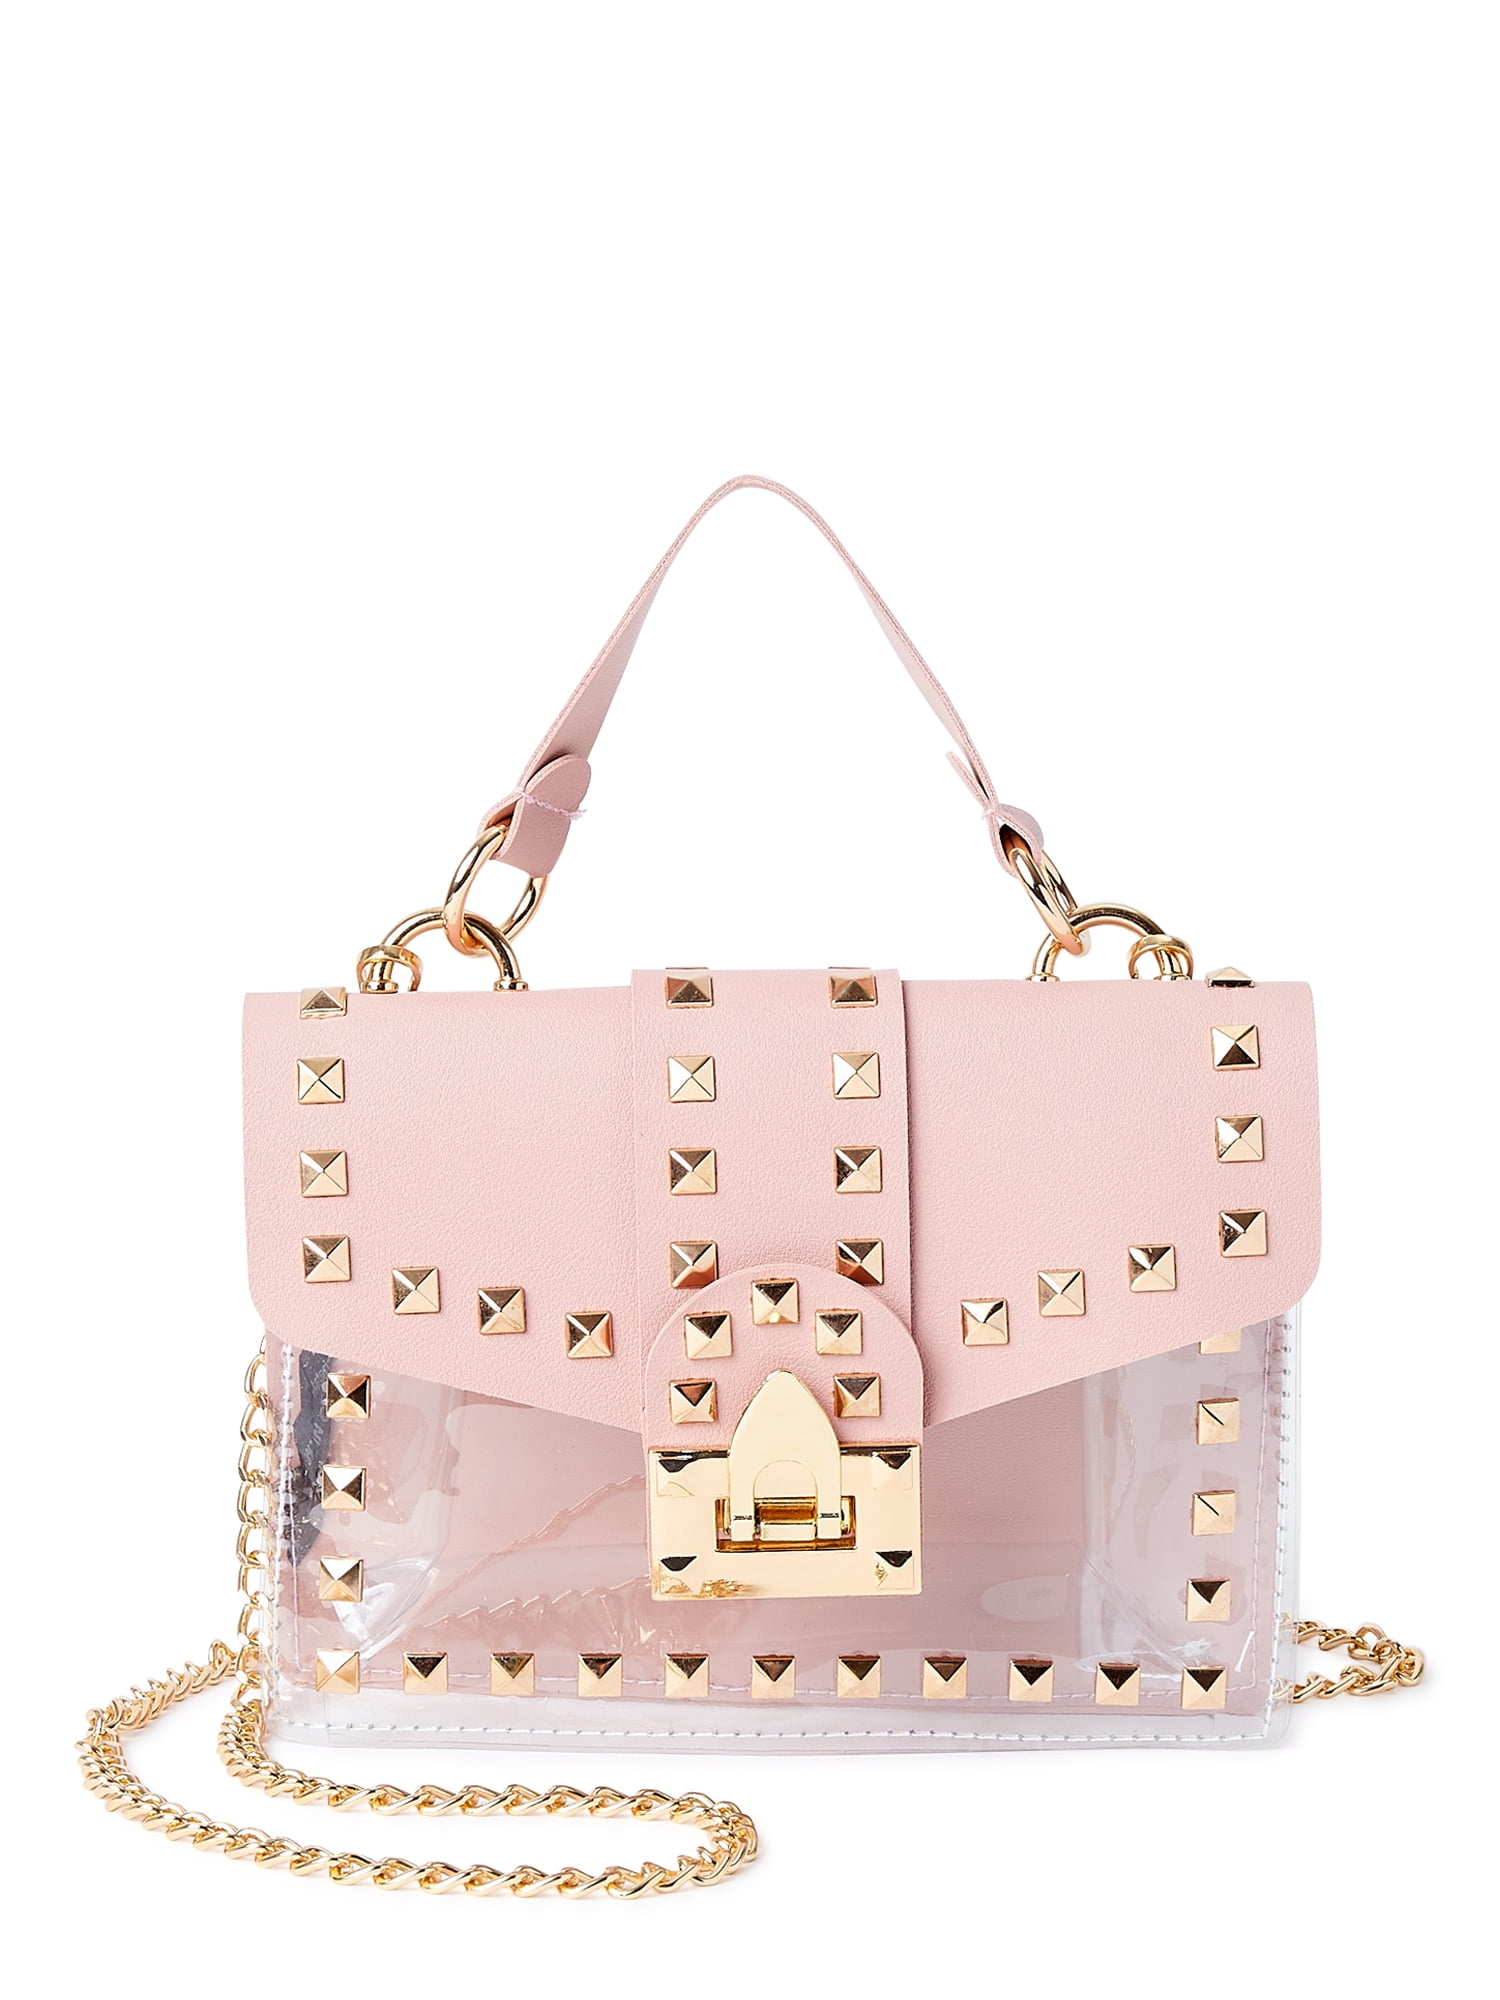 Jane & Berry Women's Top Handle Crossbody with Studs with Removable Gold Chain Strap, Blush and Clear, Size: One size, Pink